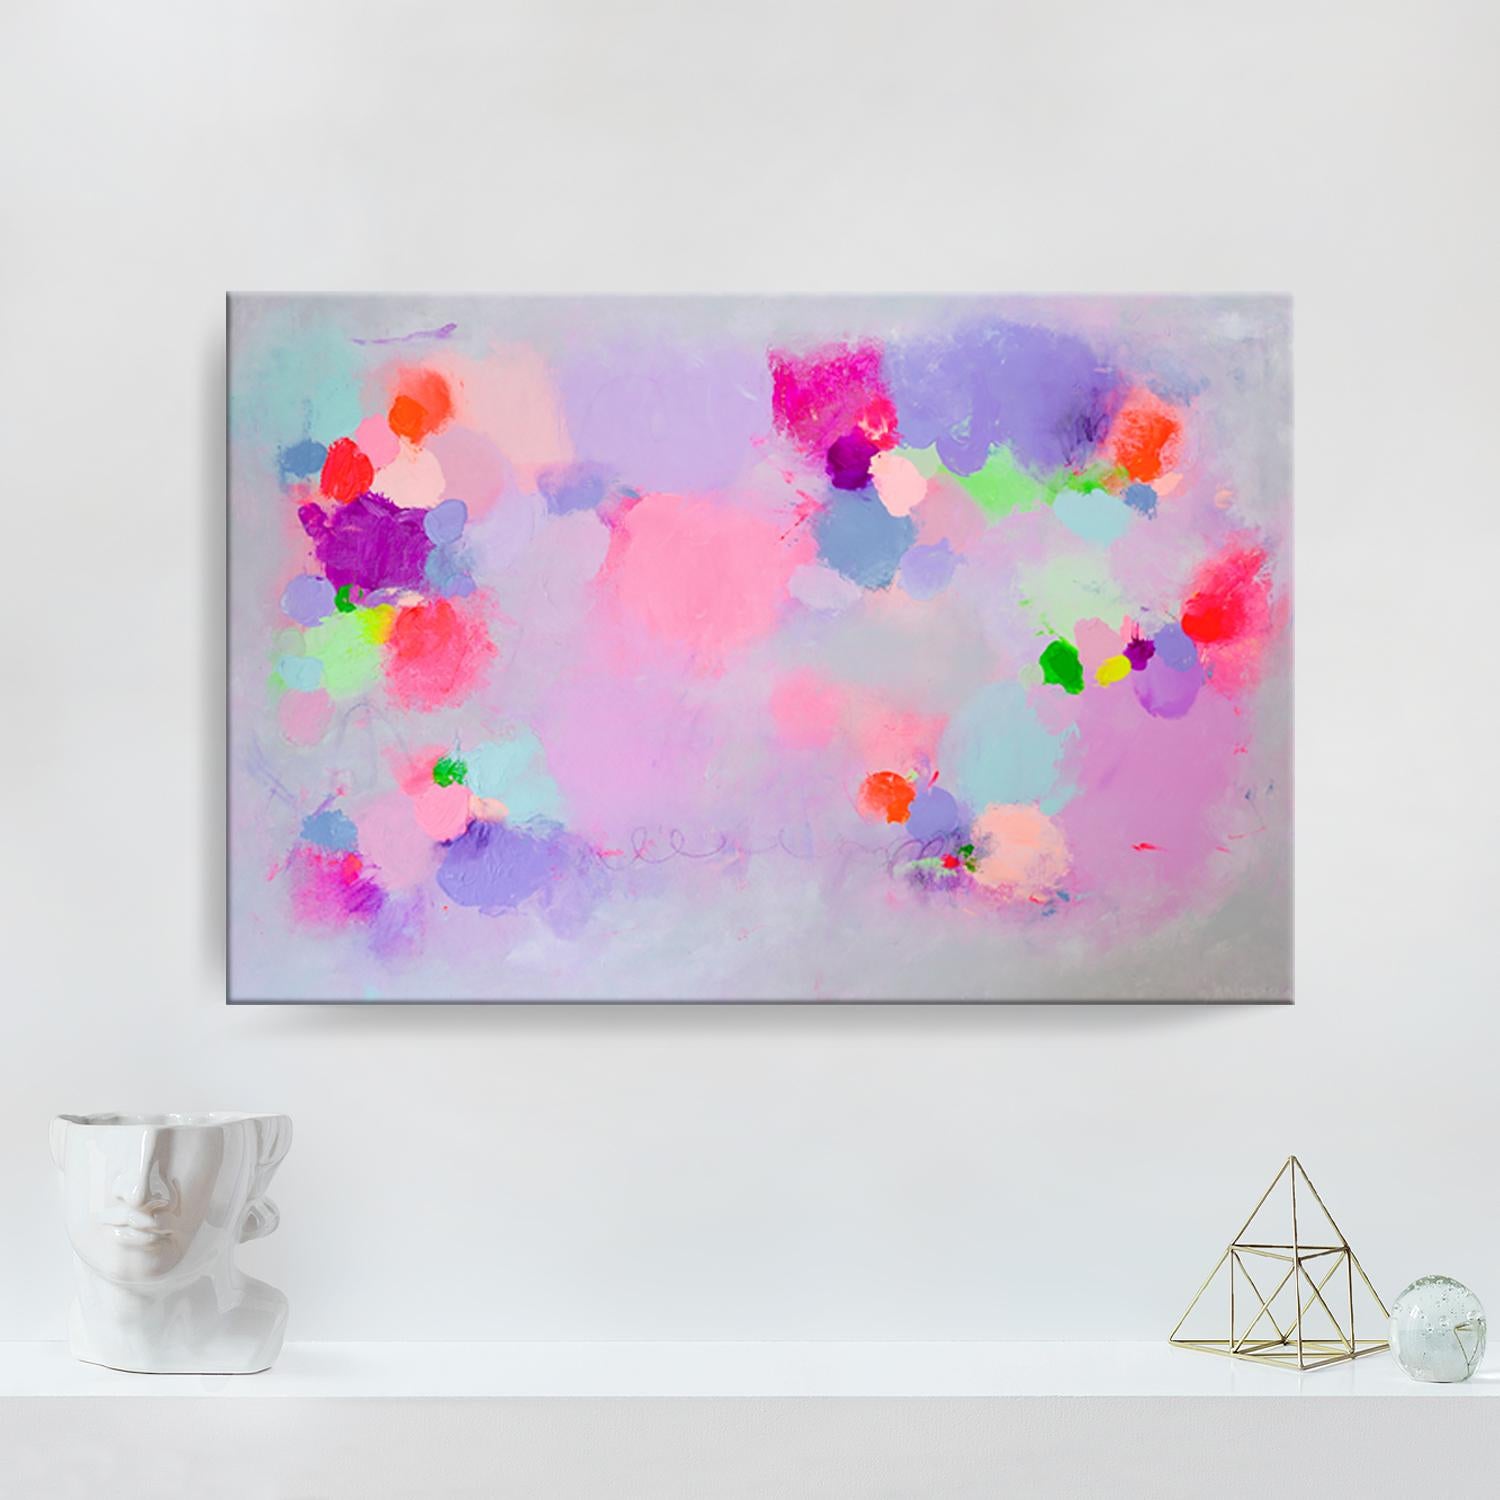 ‘Caught In A Daydream' Wrapped Canvas Original Painting features a whimsical abstract aesthetic in vivid hues of purple, pink, blue, green, orange, and red. Inspired by her travels and belief of speaking through color, Samerra’s abstract work is a